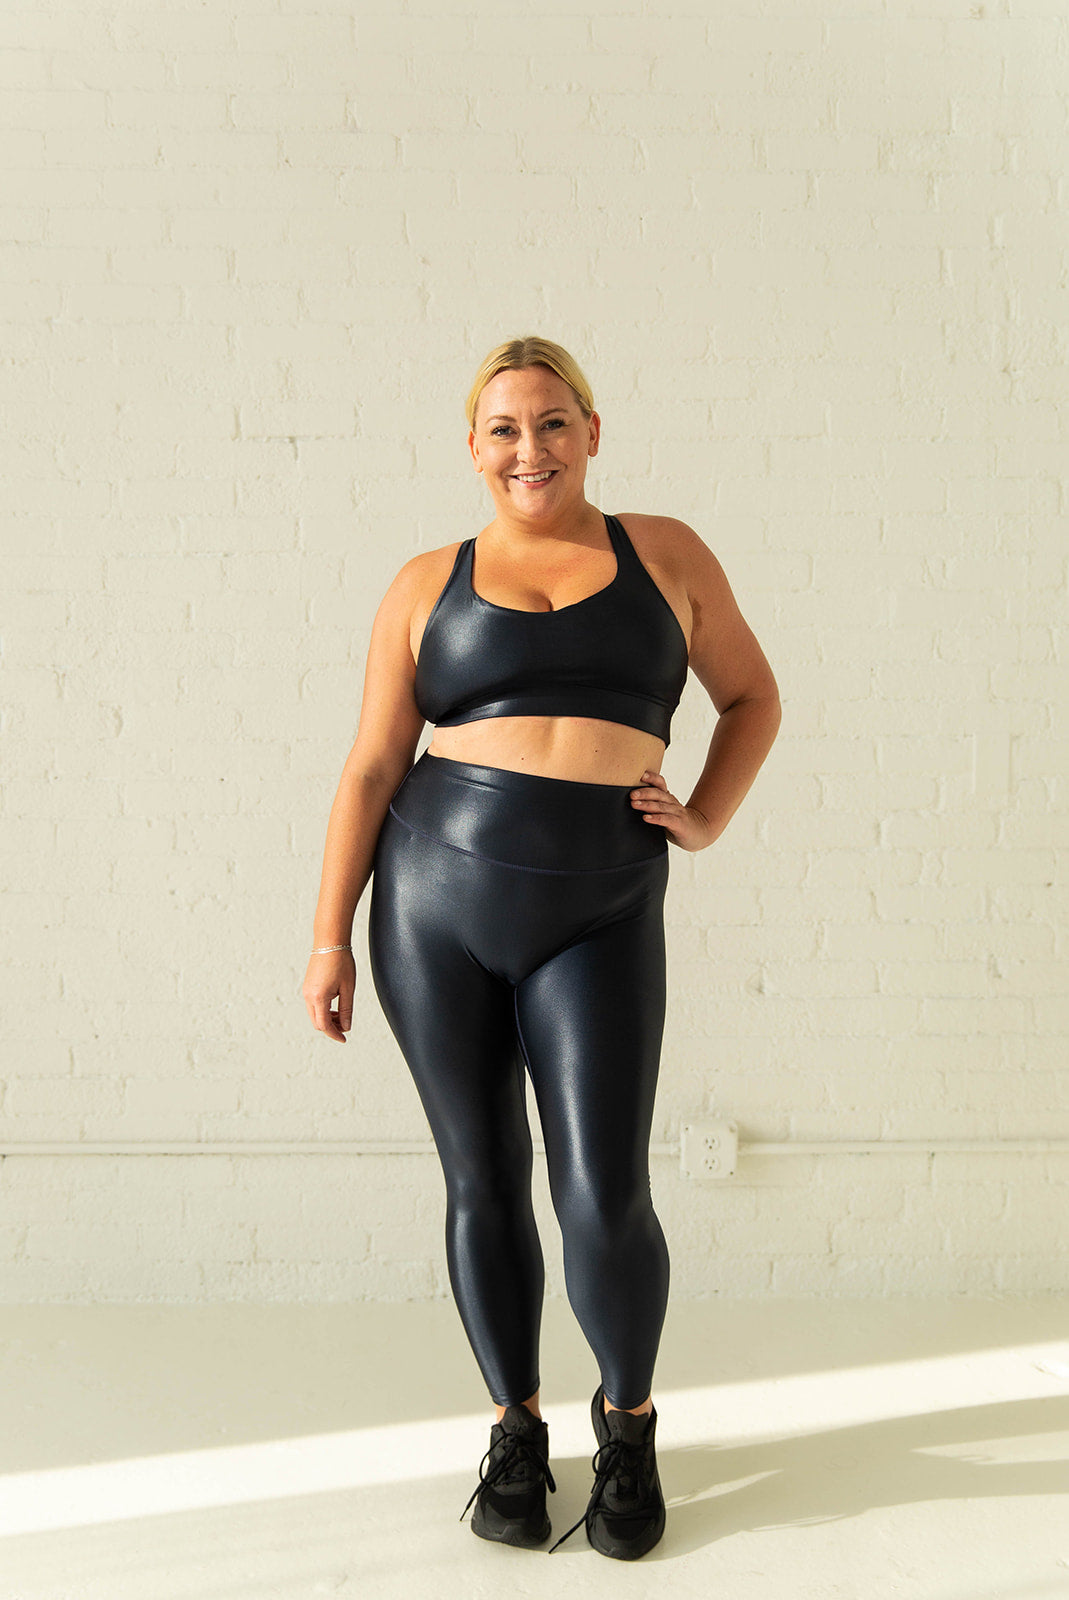 Navy Blue, Sky Blue, and More! Style Blue Leggings Like Never Before - Dona  Jo Fitness Fashion Blog